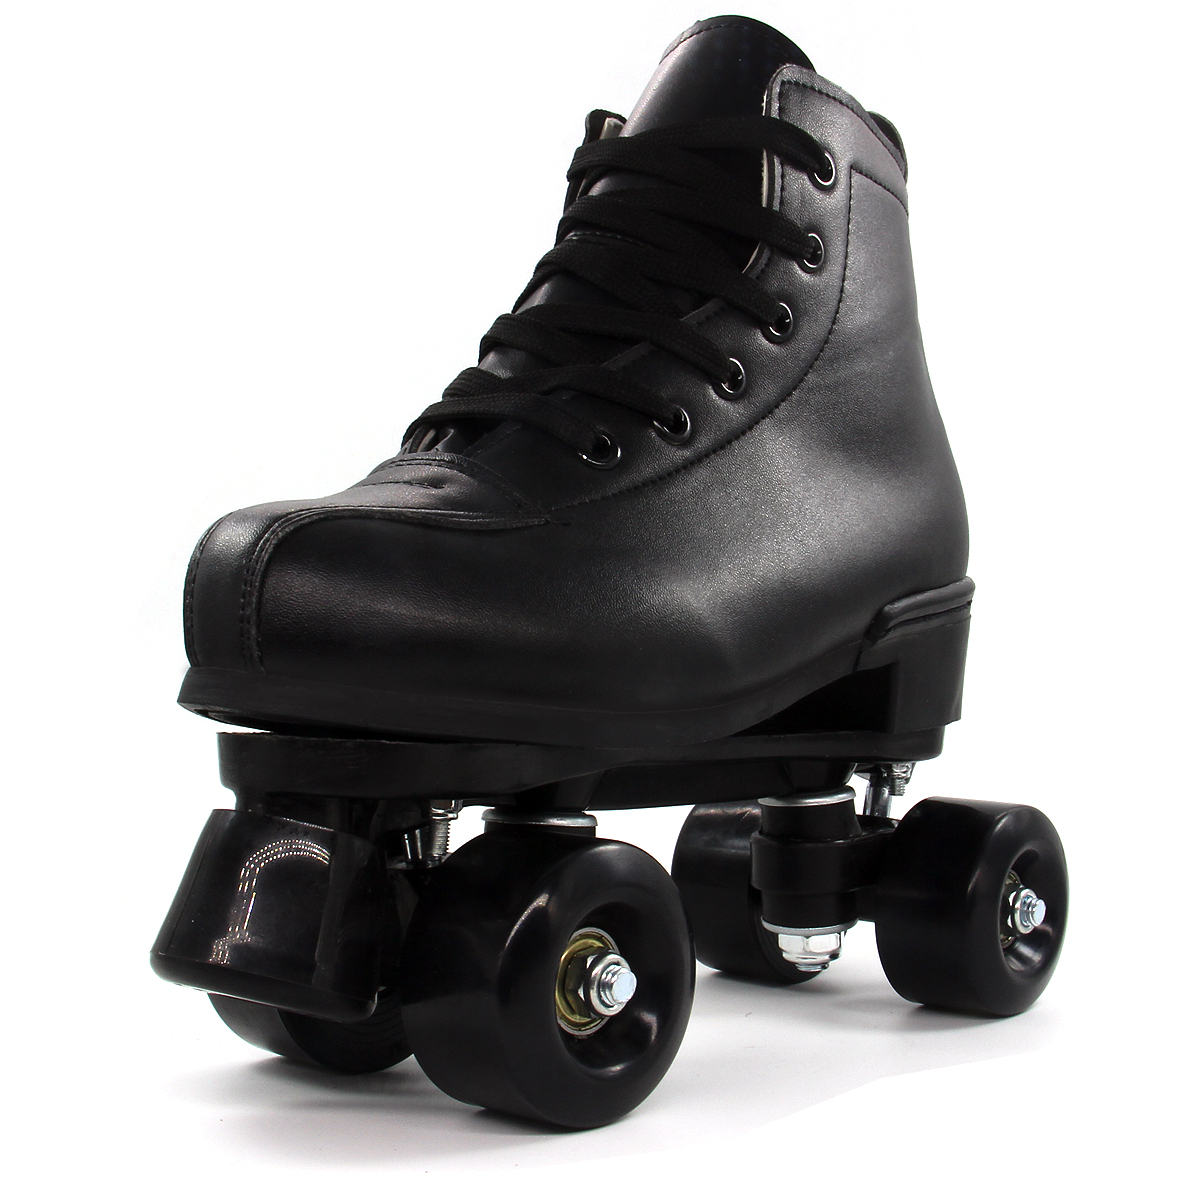 Factory Cheap Price Wholesale 4 Wheels Skate Shoes | Roller skate ...